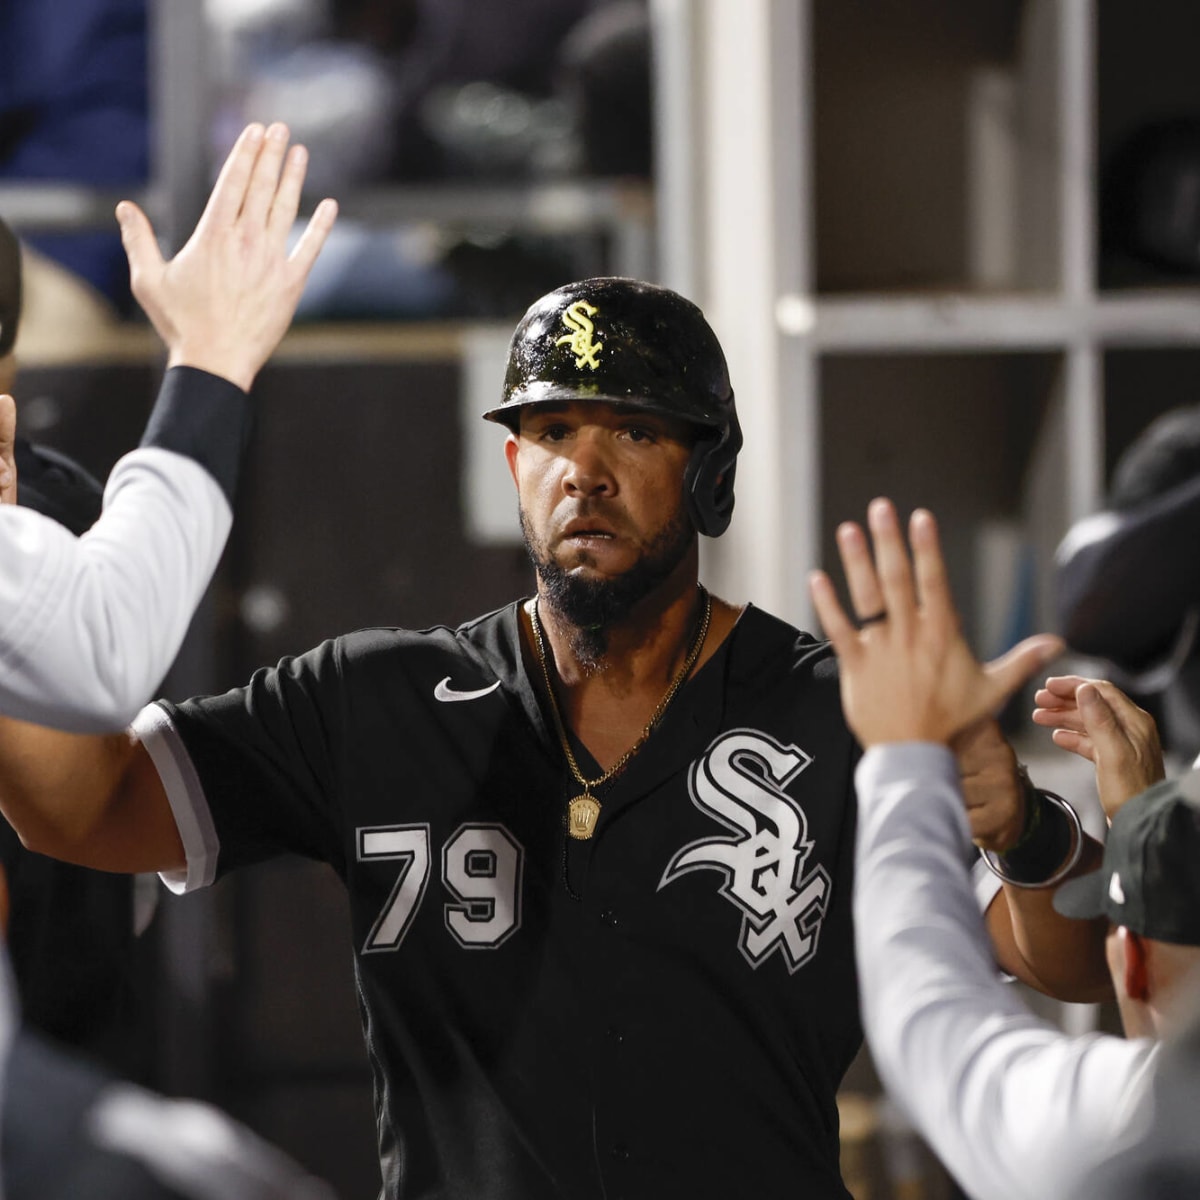 José Abreu & Co. showing signs, but White Sox still waiting for offense to  break out - CHGO